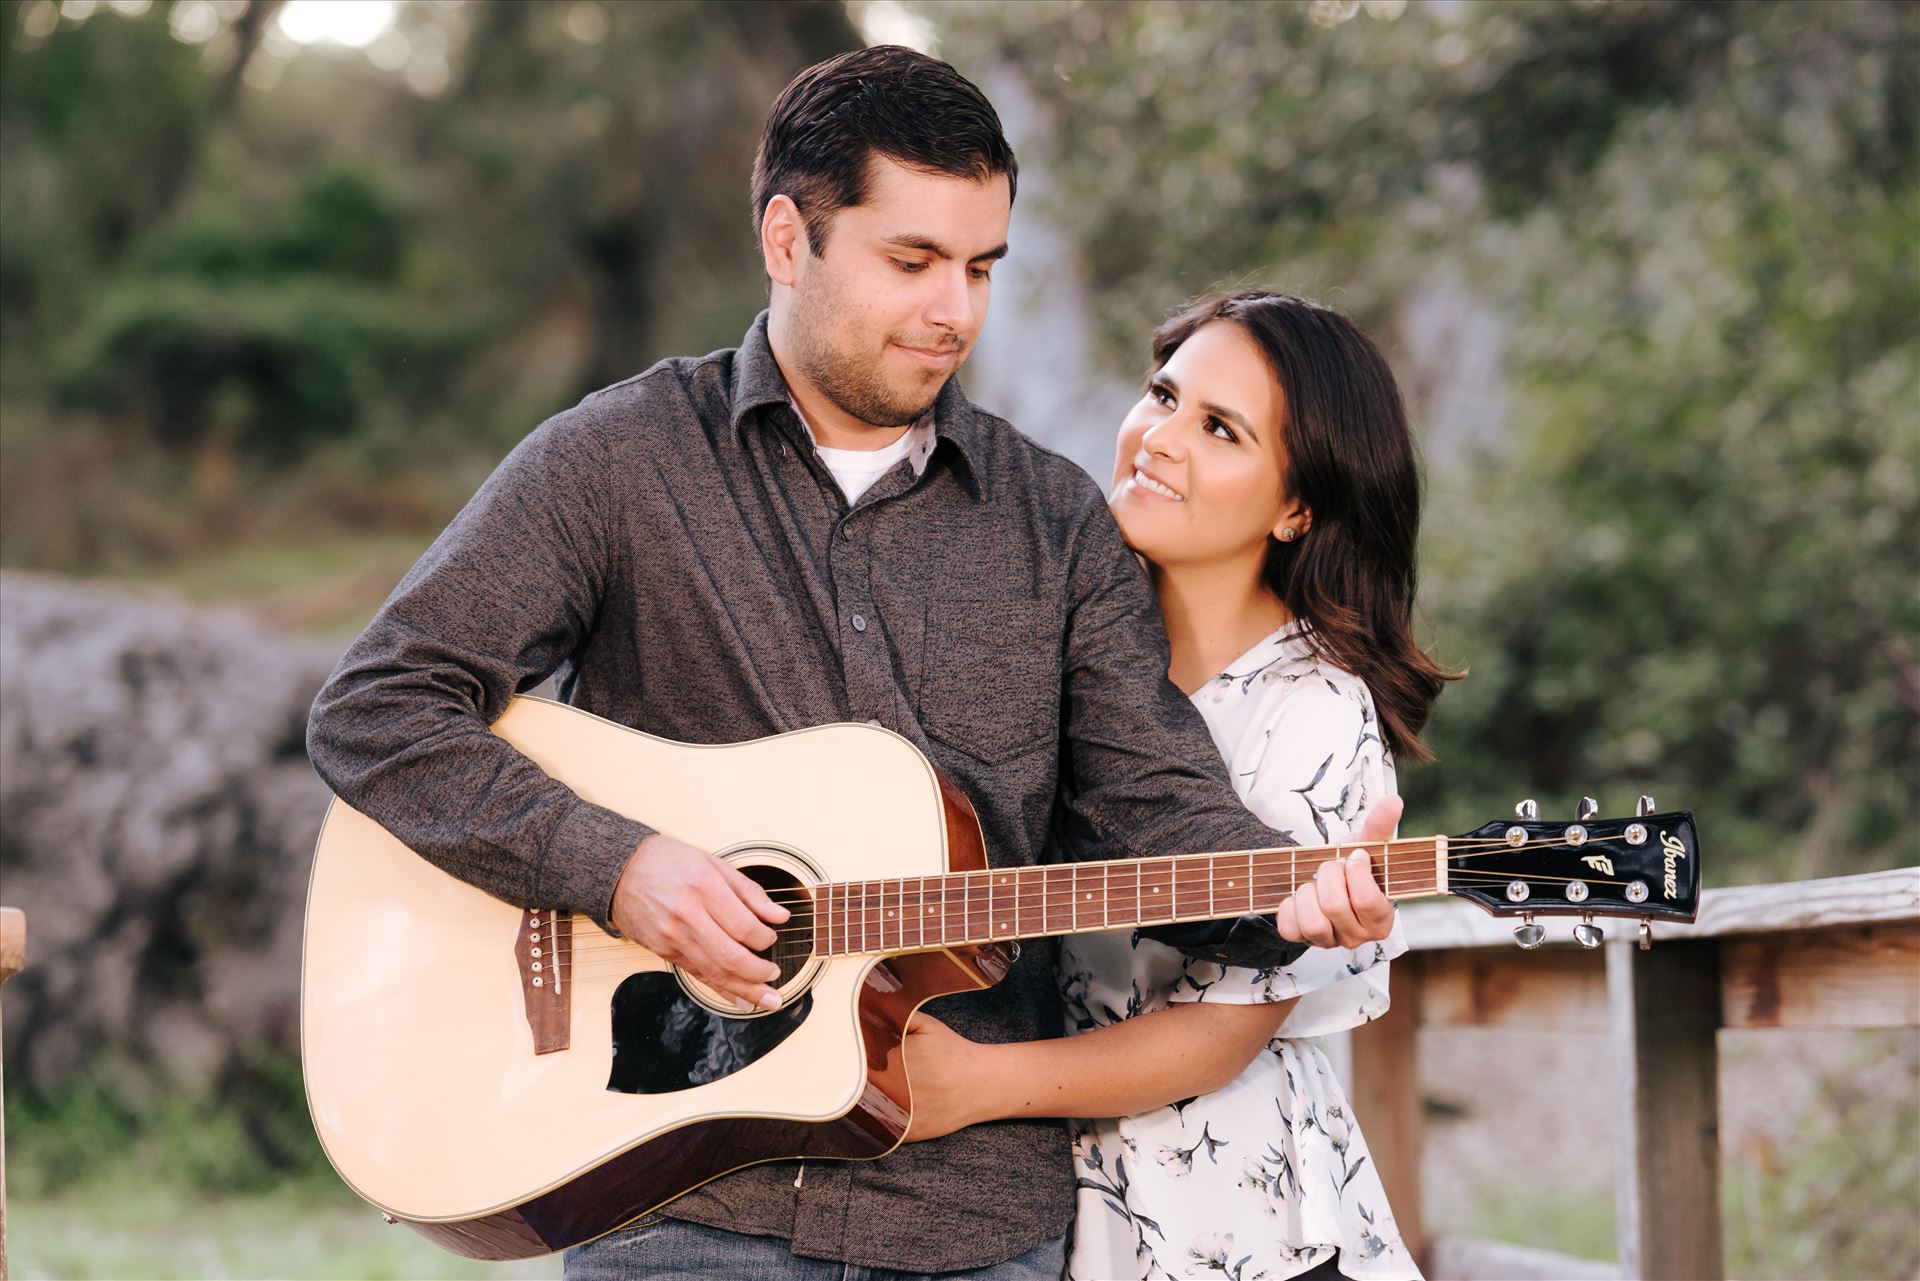 DSC_6898.JPG - Mirror's Edge Photography captures CiCi and Rocky's Sunrise Engagement in Los Osos California at Los Osos Oaks Reserve. Guitarist engagement photography by Sarah Williams